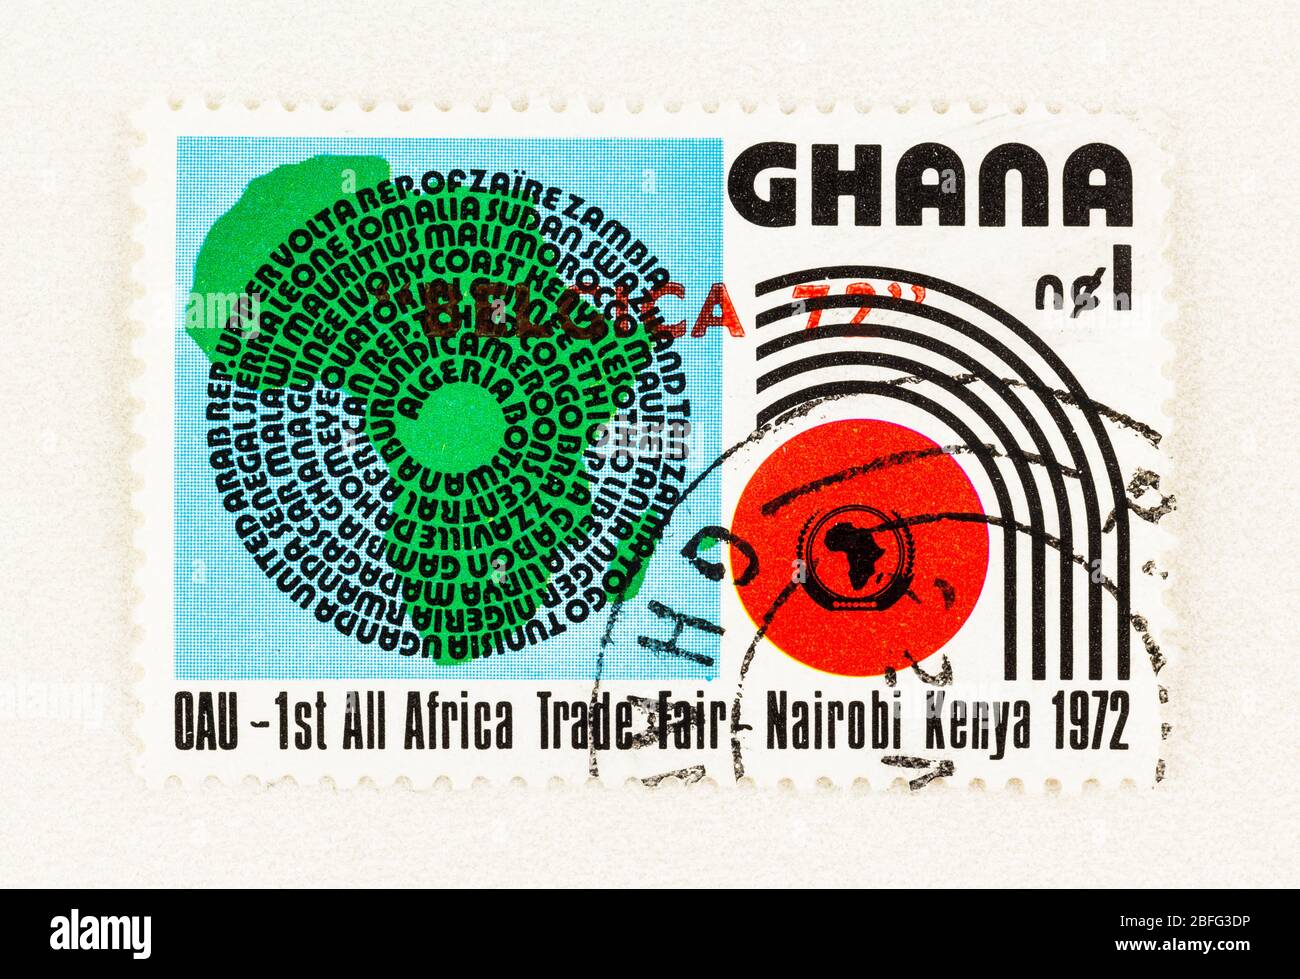 SEATTLE WASHINGTON - April 17, 2020: Ghana stamp ,overprint with Belgica 72,  commemorating the All African Trade Fair in Kenya. Stock Photo